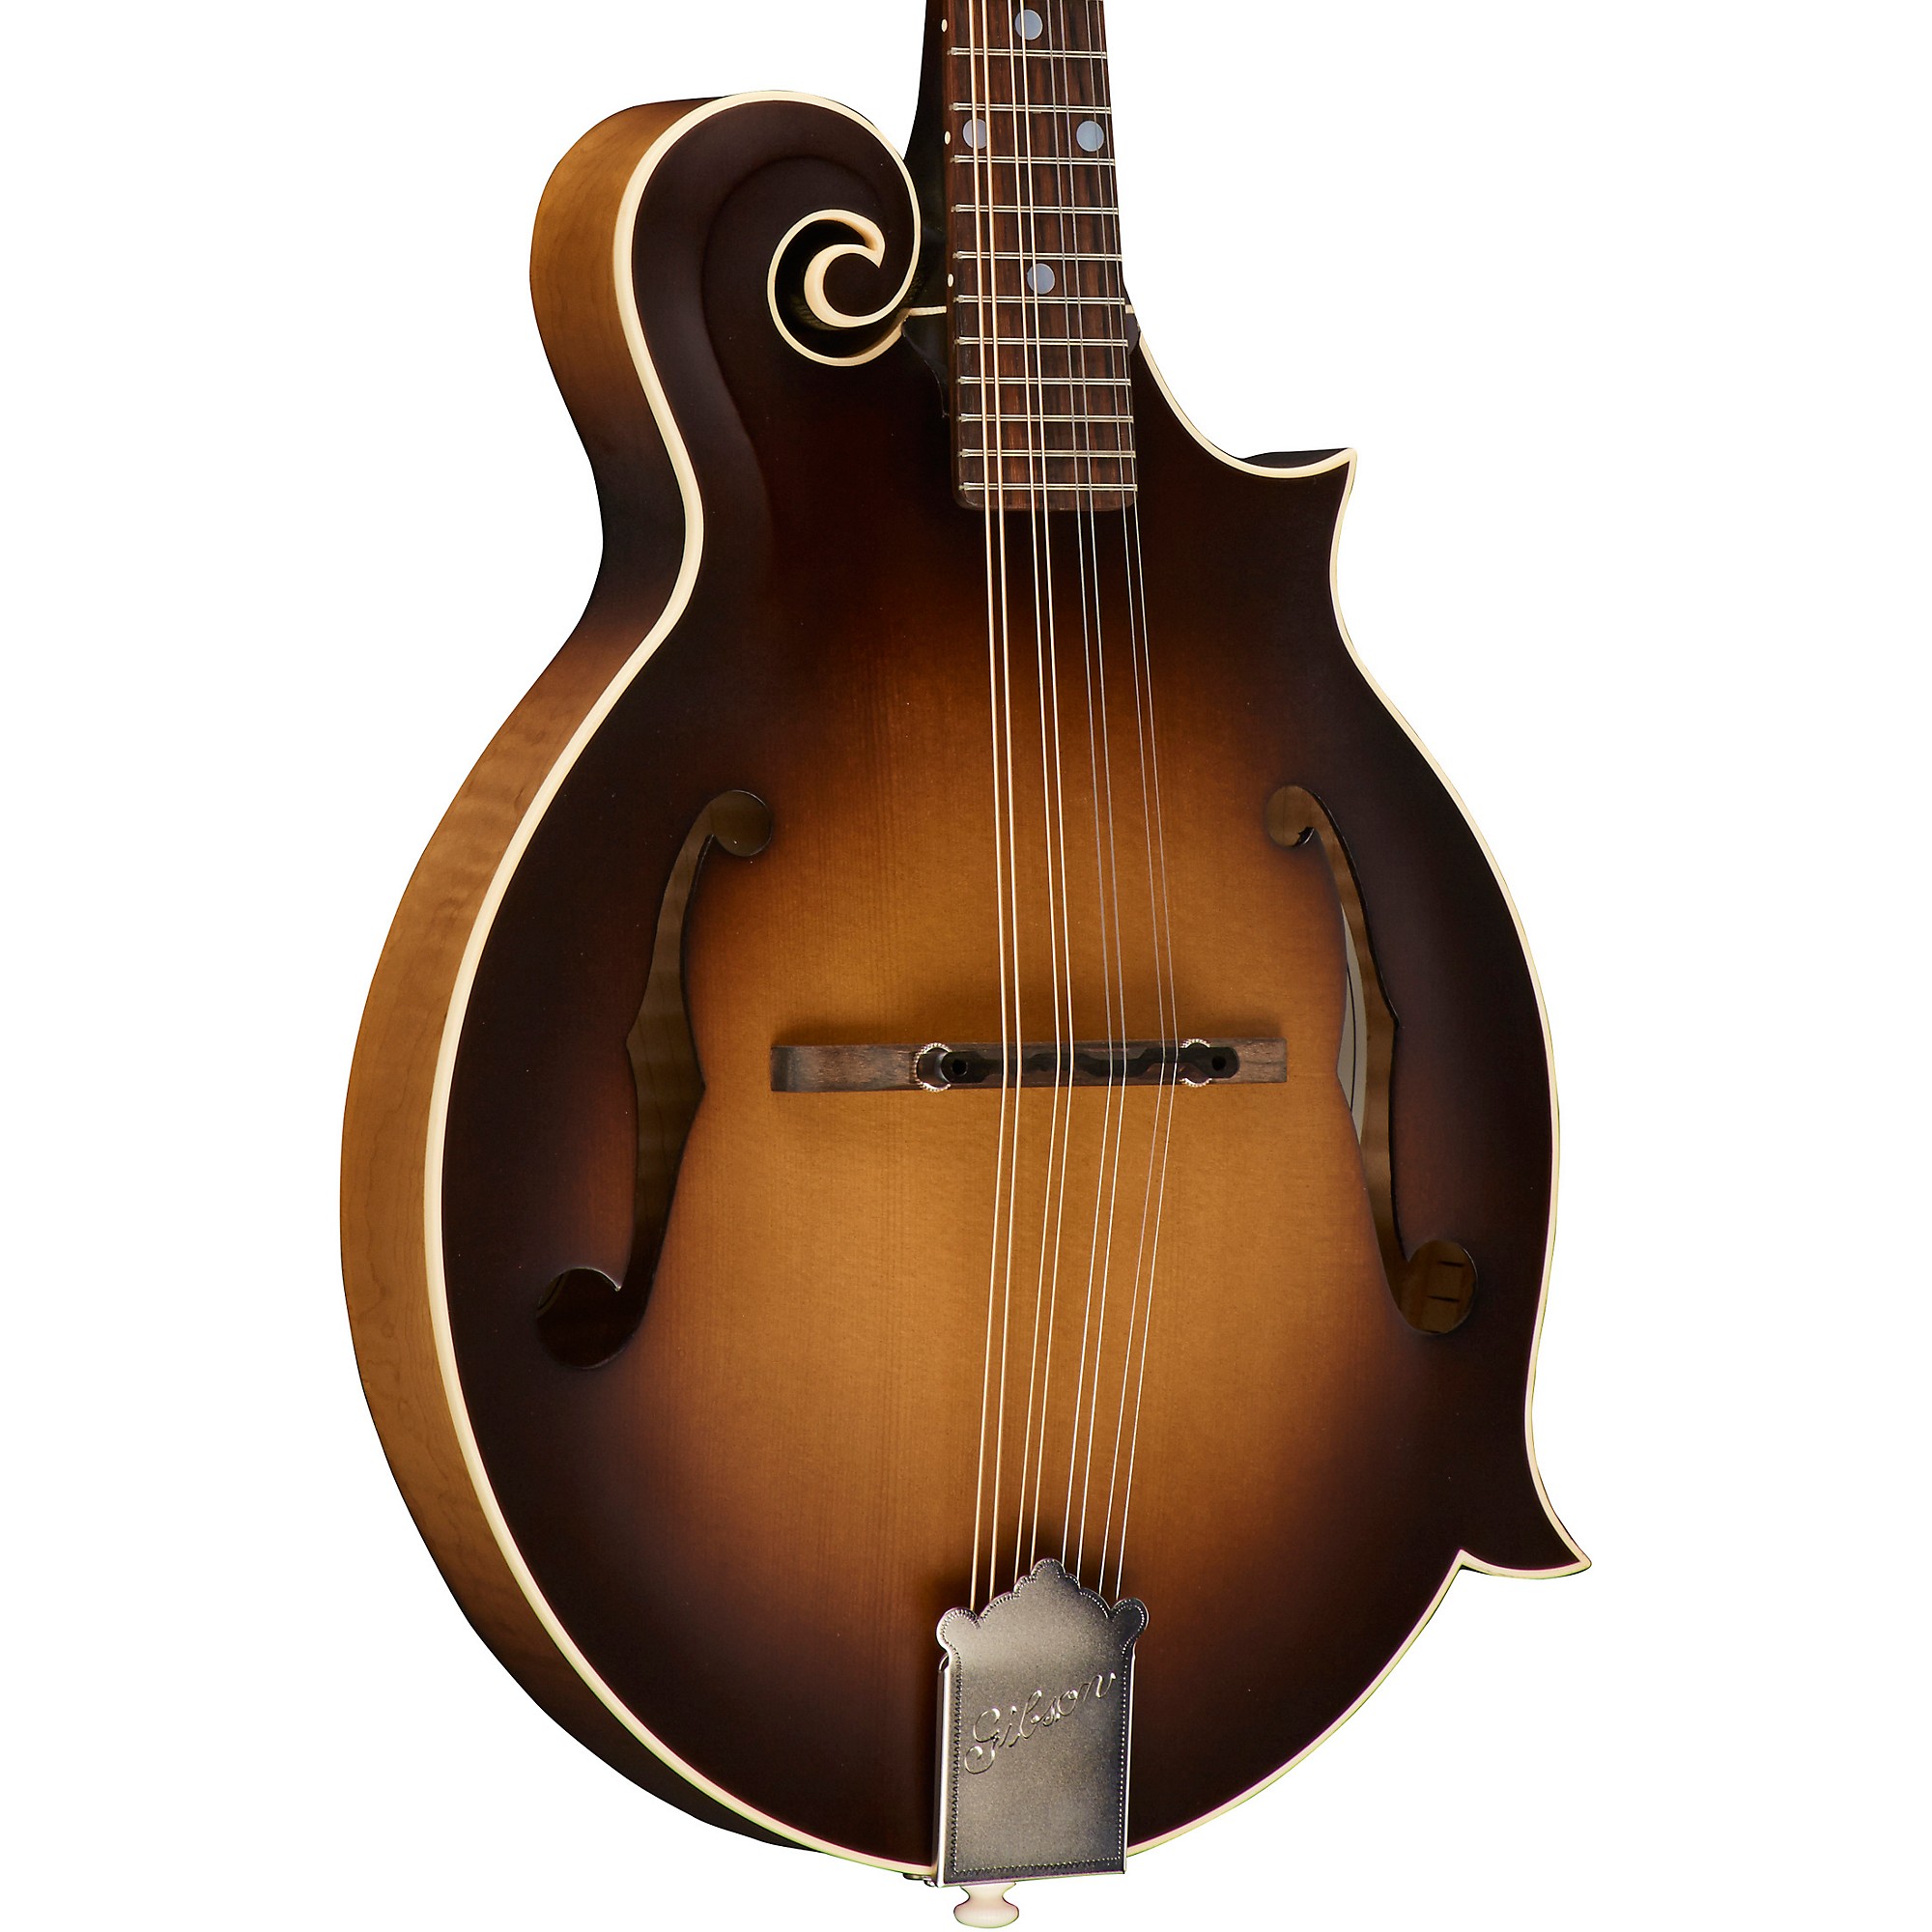 When is the best time to buy a gibson mandolin?